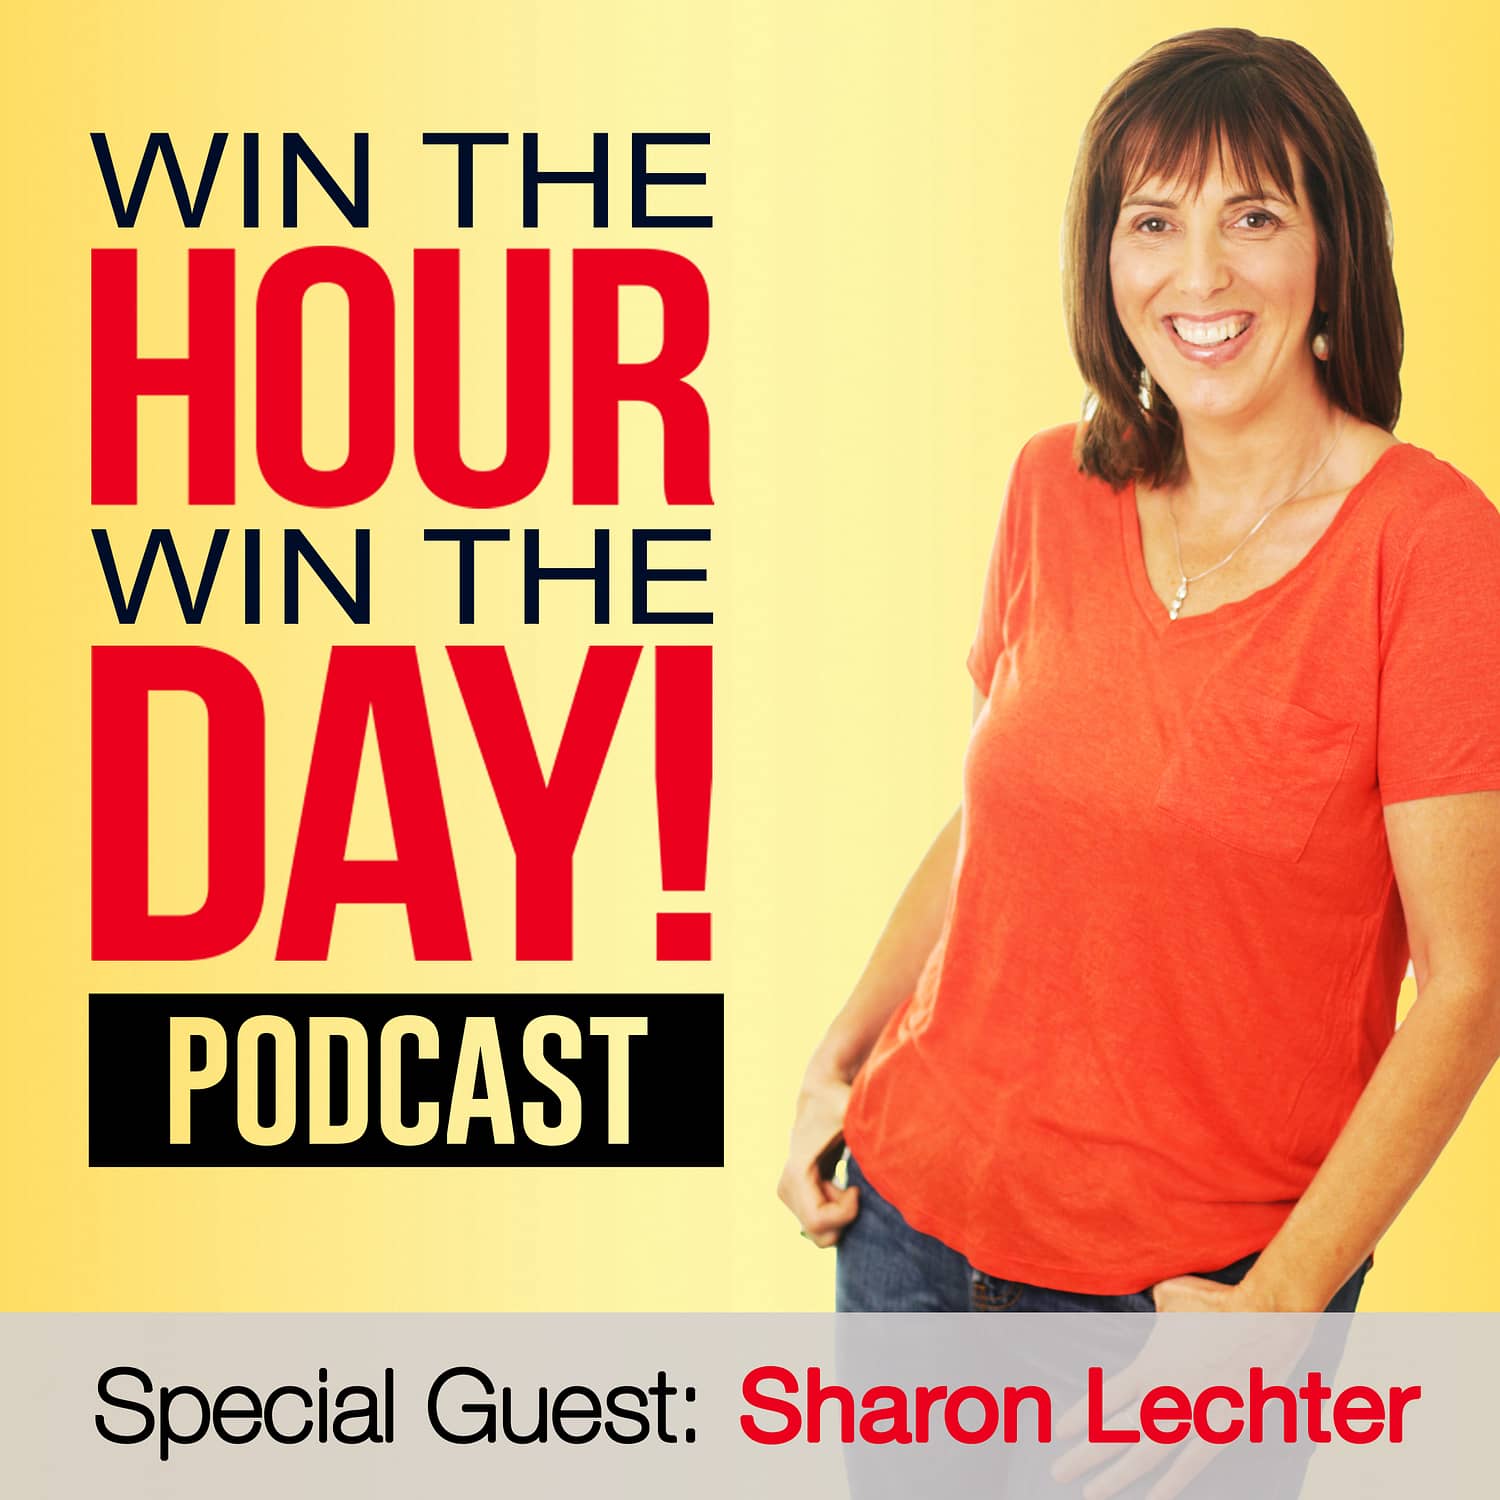 How To Build Stability Through Storytelling With Sharon Lechter